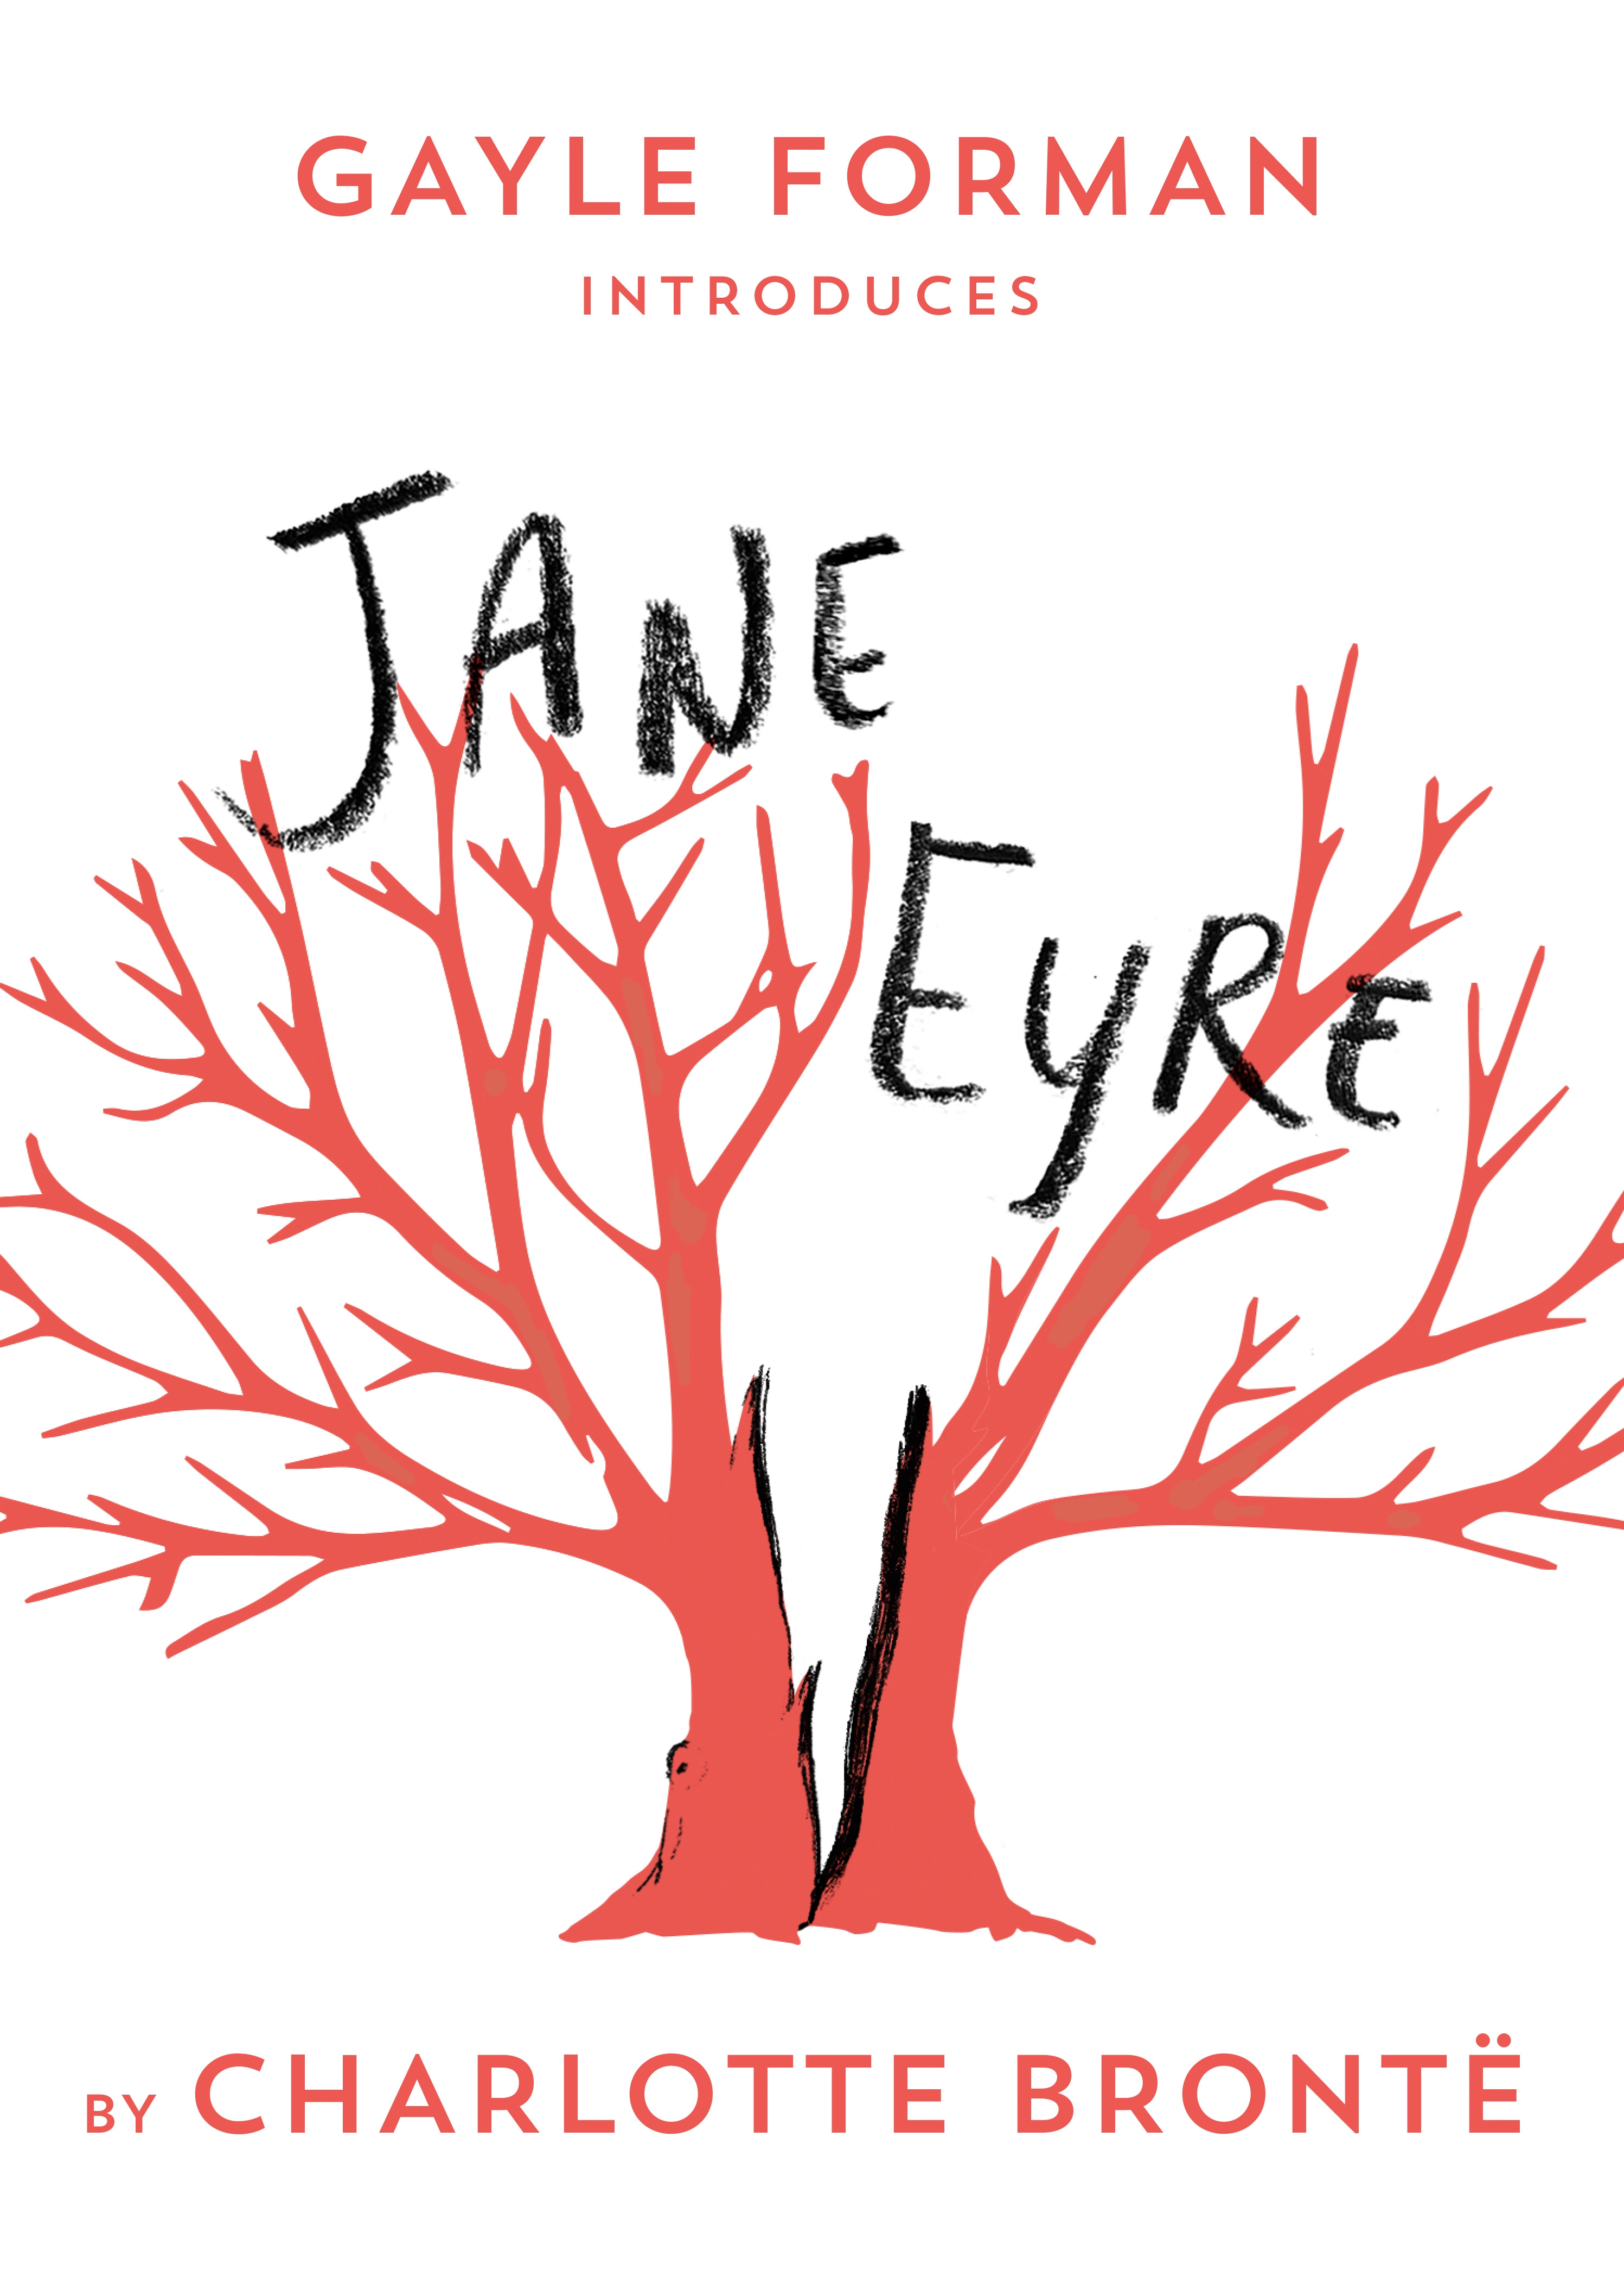 jane eyre book report